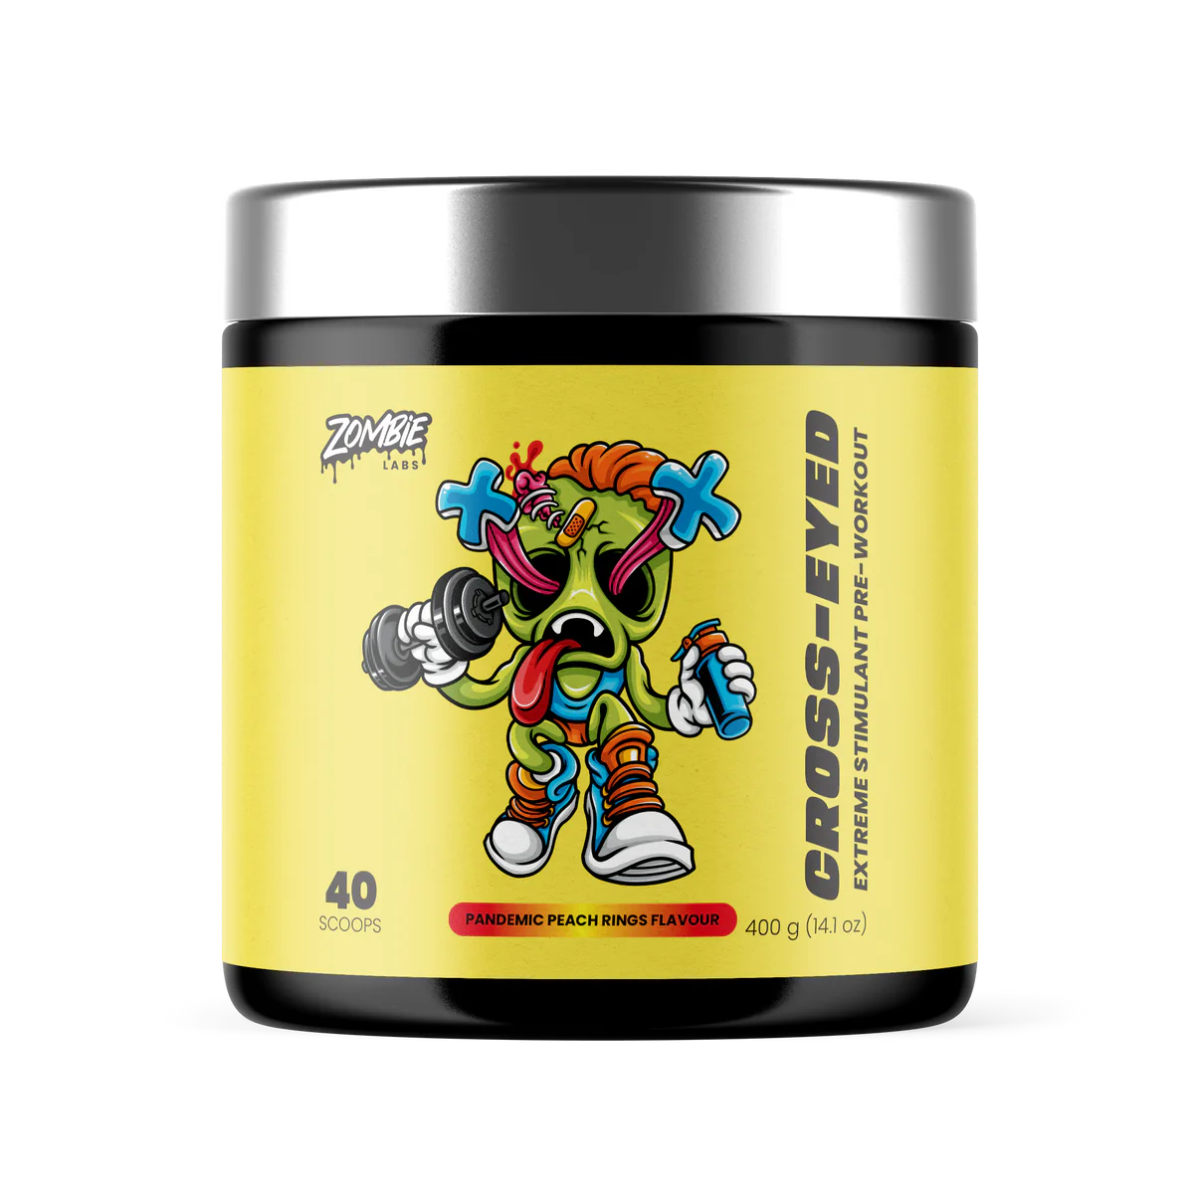 Zombie Labs - Cross-Eyed - Supplements - 40 Serves - The Cave Gym